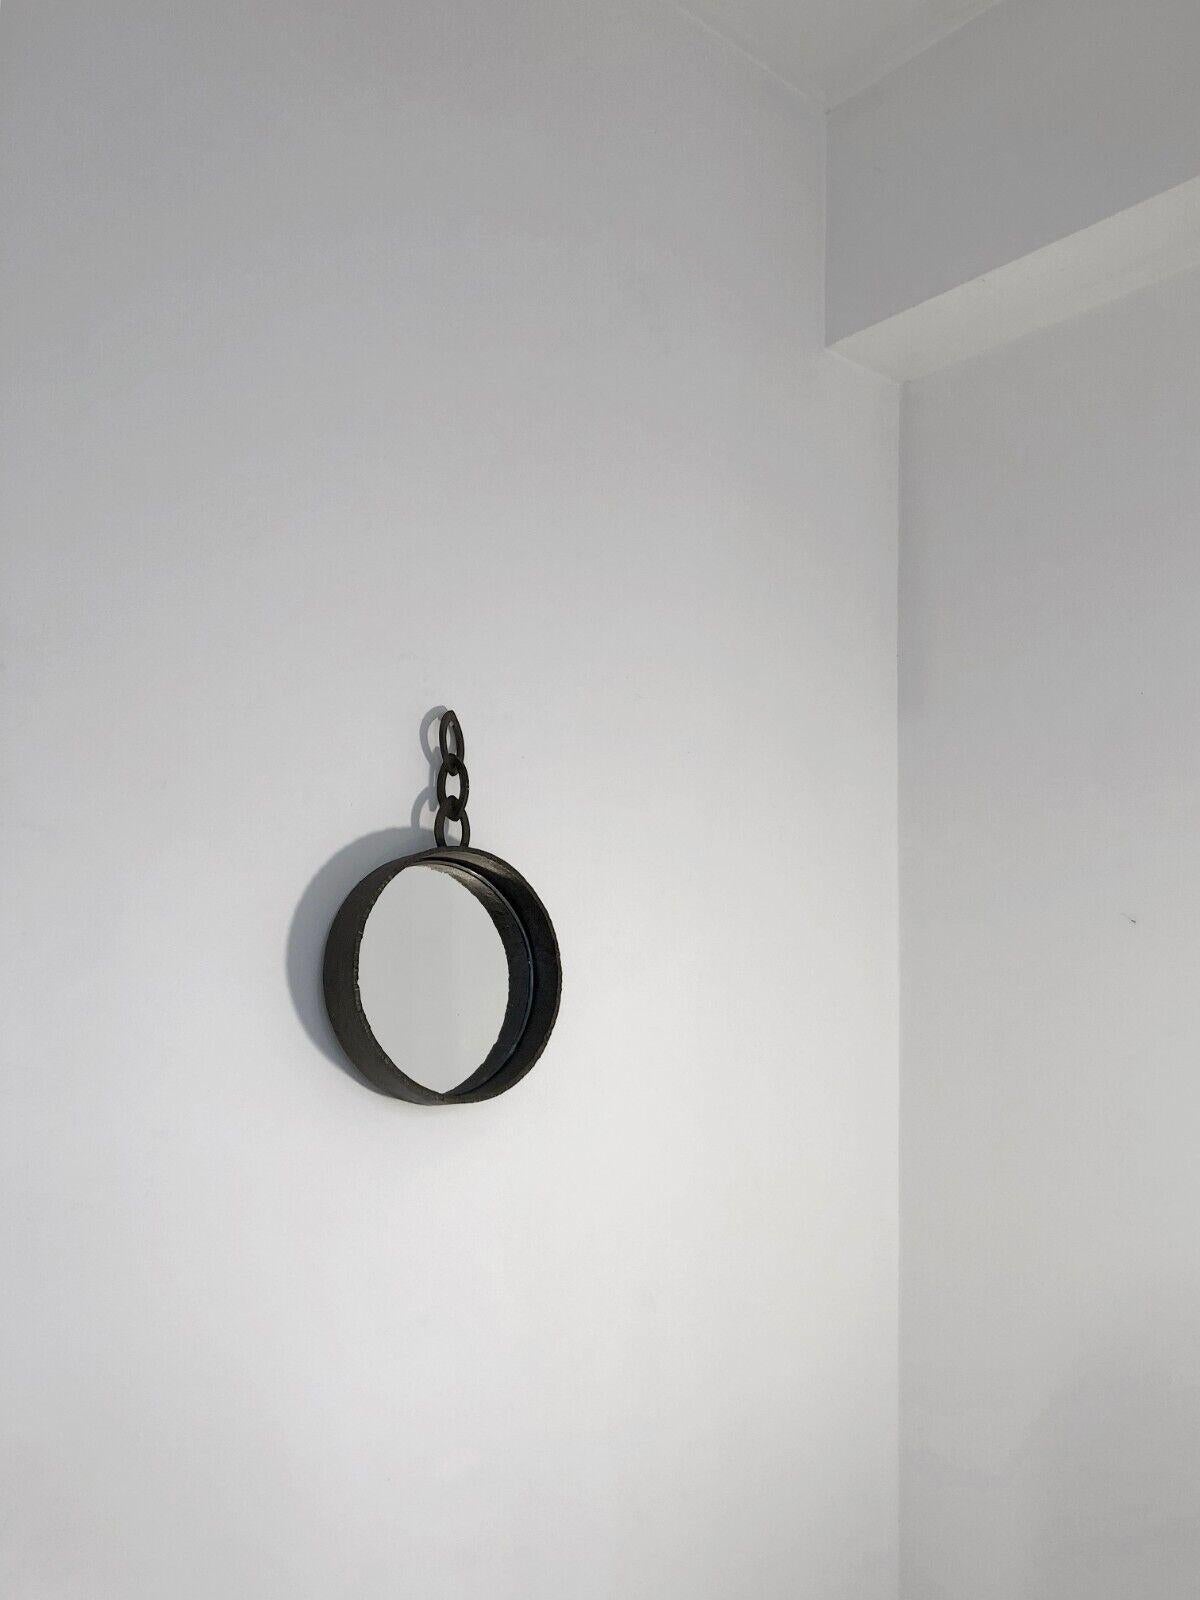 A small circular wall mirror, Modernist, Brutalist, Folk Art, Rustic-Modern, thick frame and 3-link oval chain in thick wrought iron, in the spirit of Jean Touret and Les artisans de Marolles, to be attributed, France 1960.